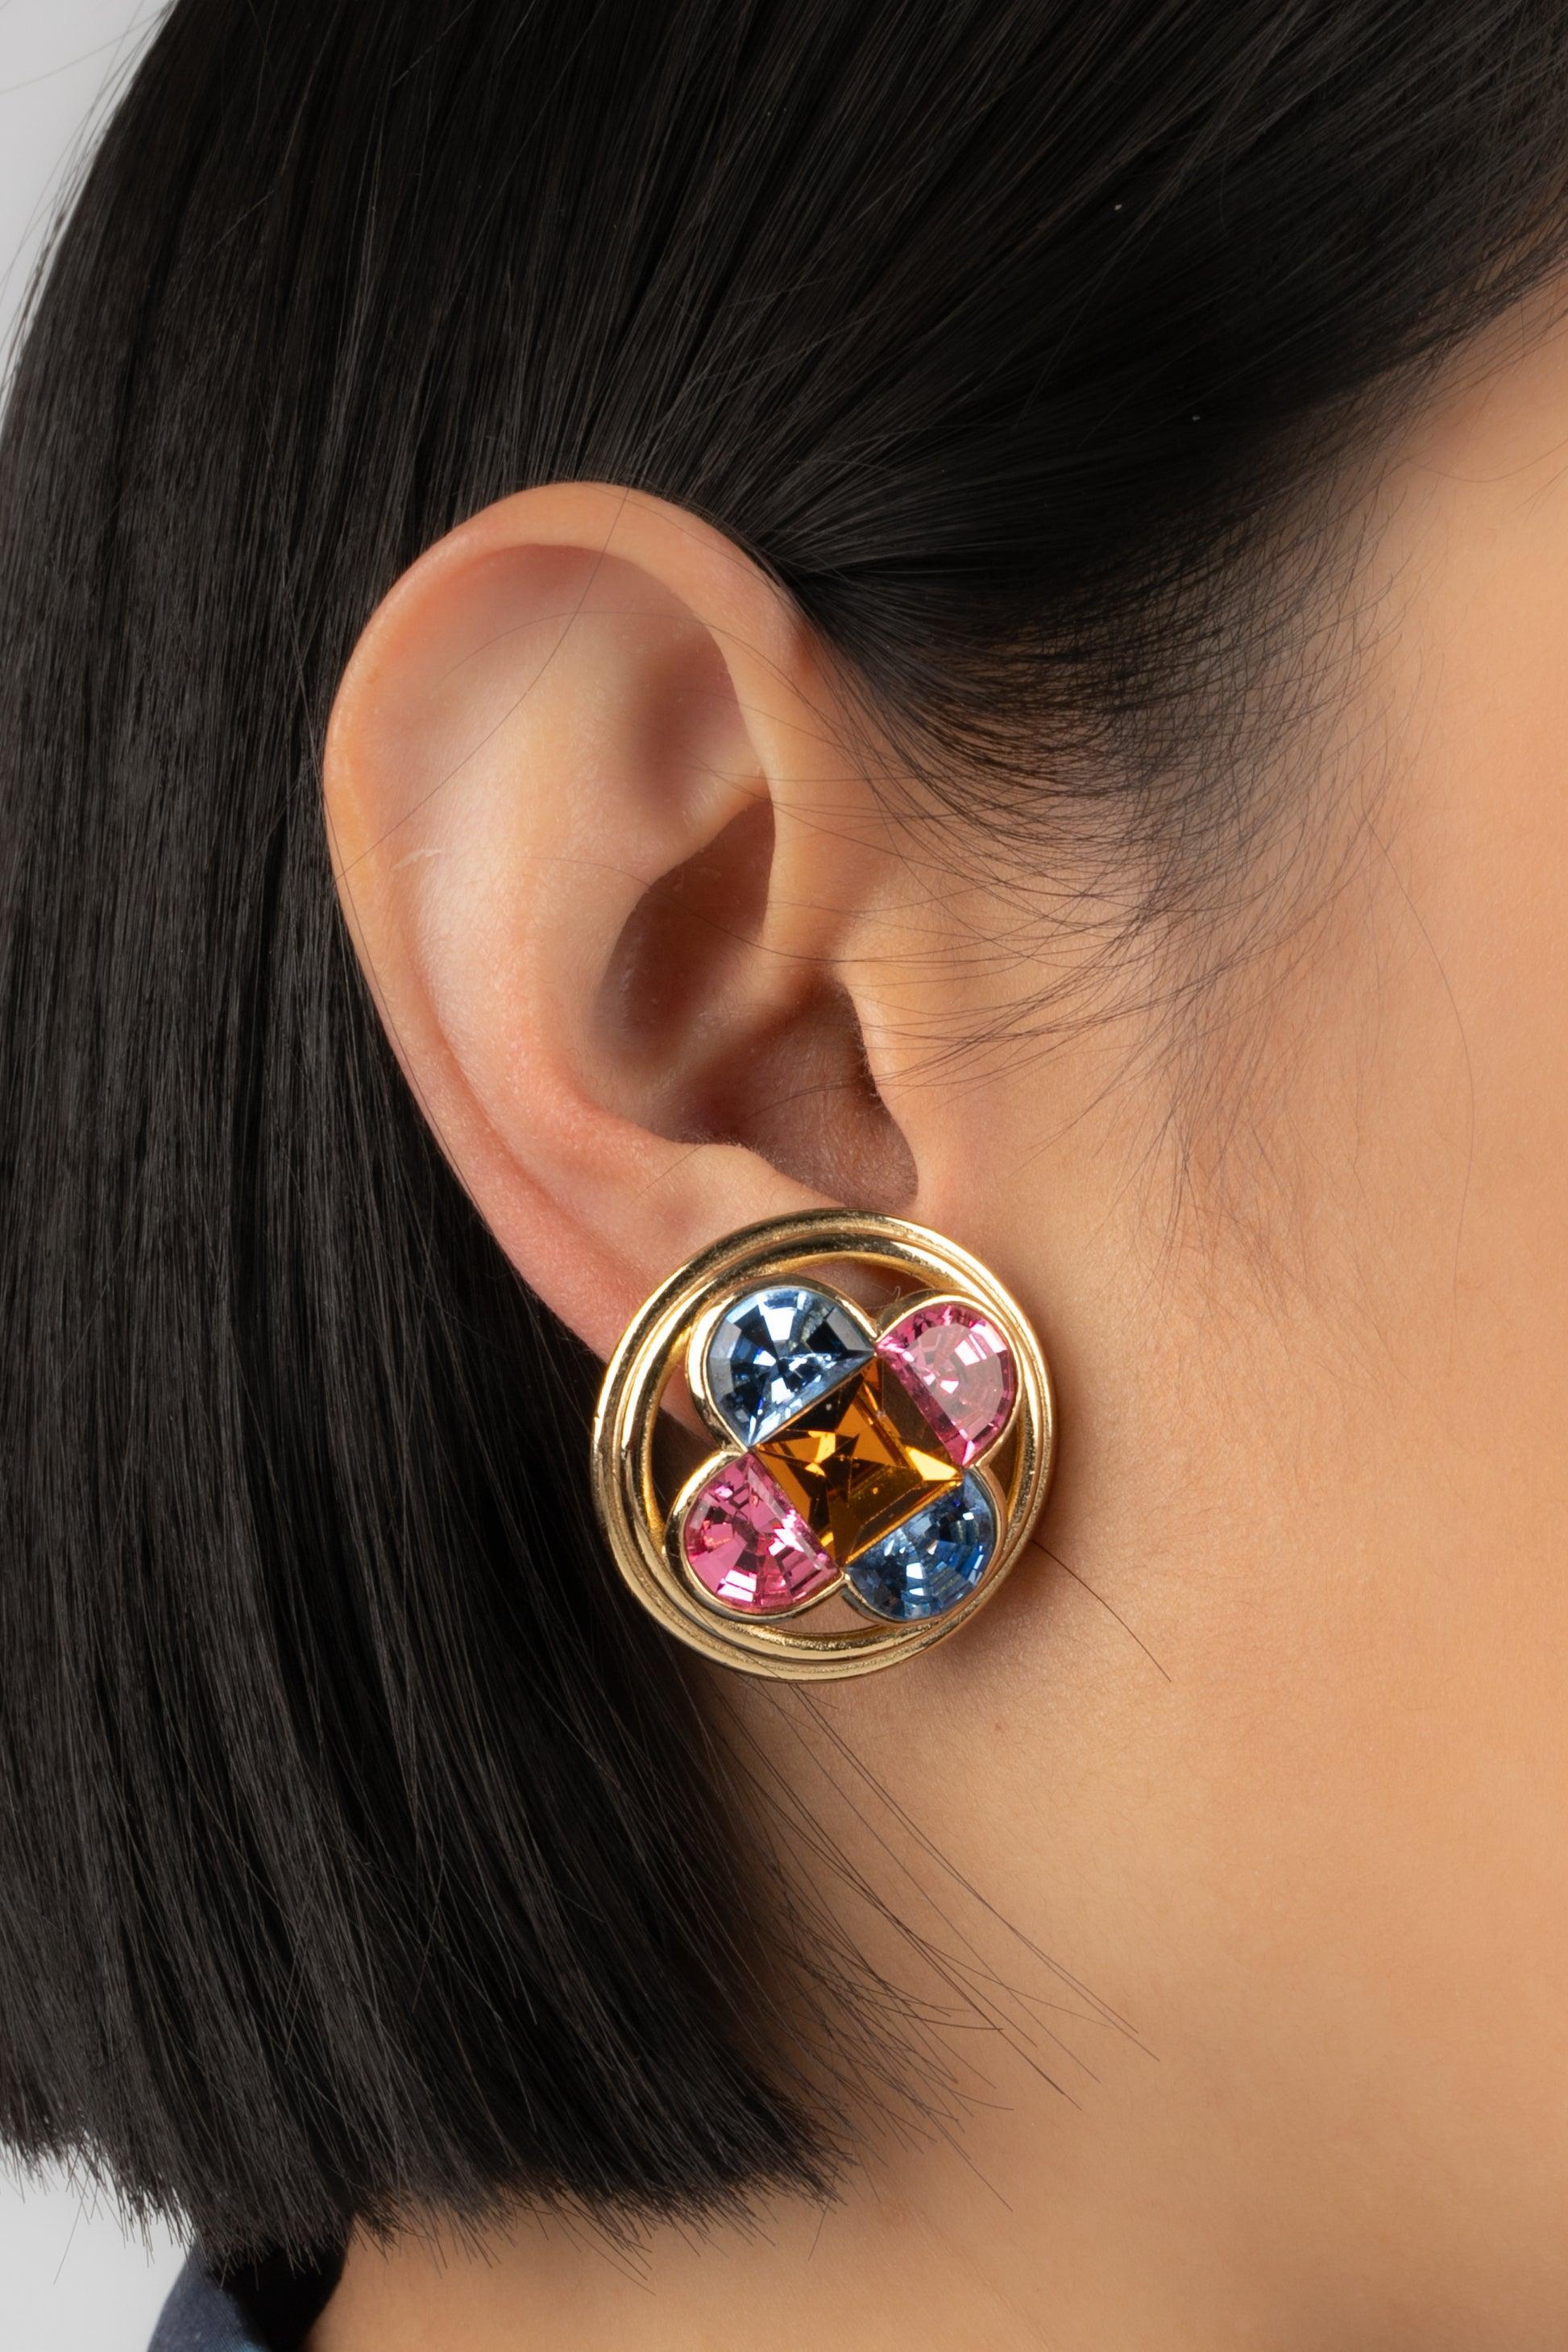 Christian Dior - Golden metal openwork clip-on earrings with multicolored rhinestones.

Additional information:
Condition: Very good condition
Dimensions: Diameter: 3.2 cm

Seller Reference: BO110
